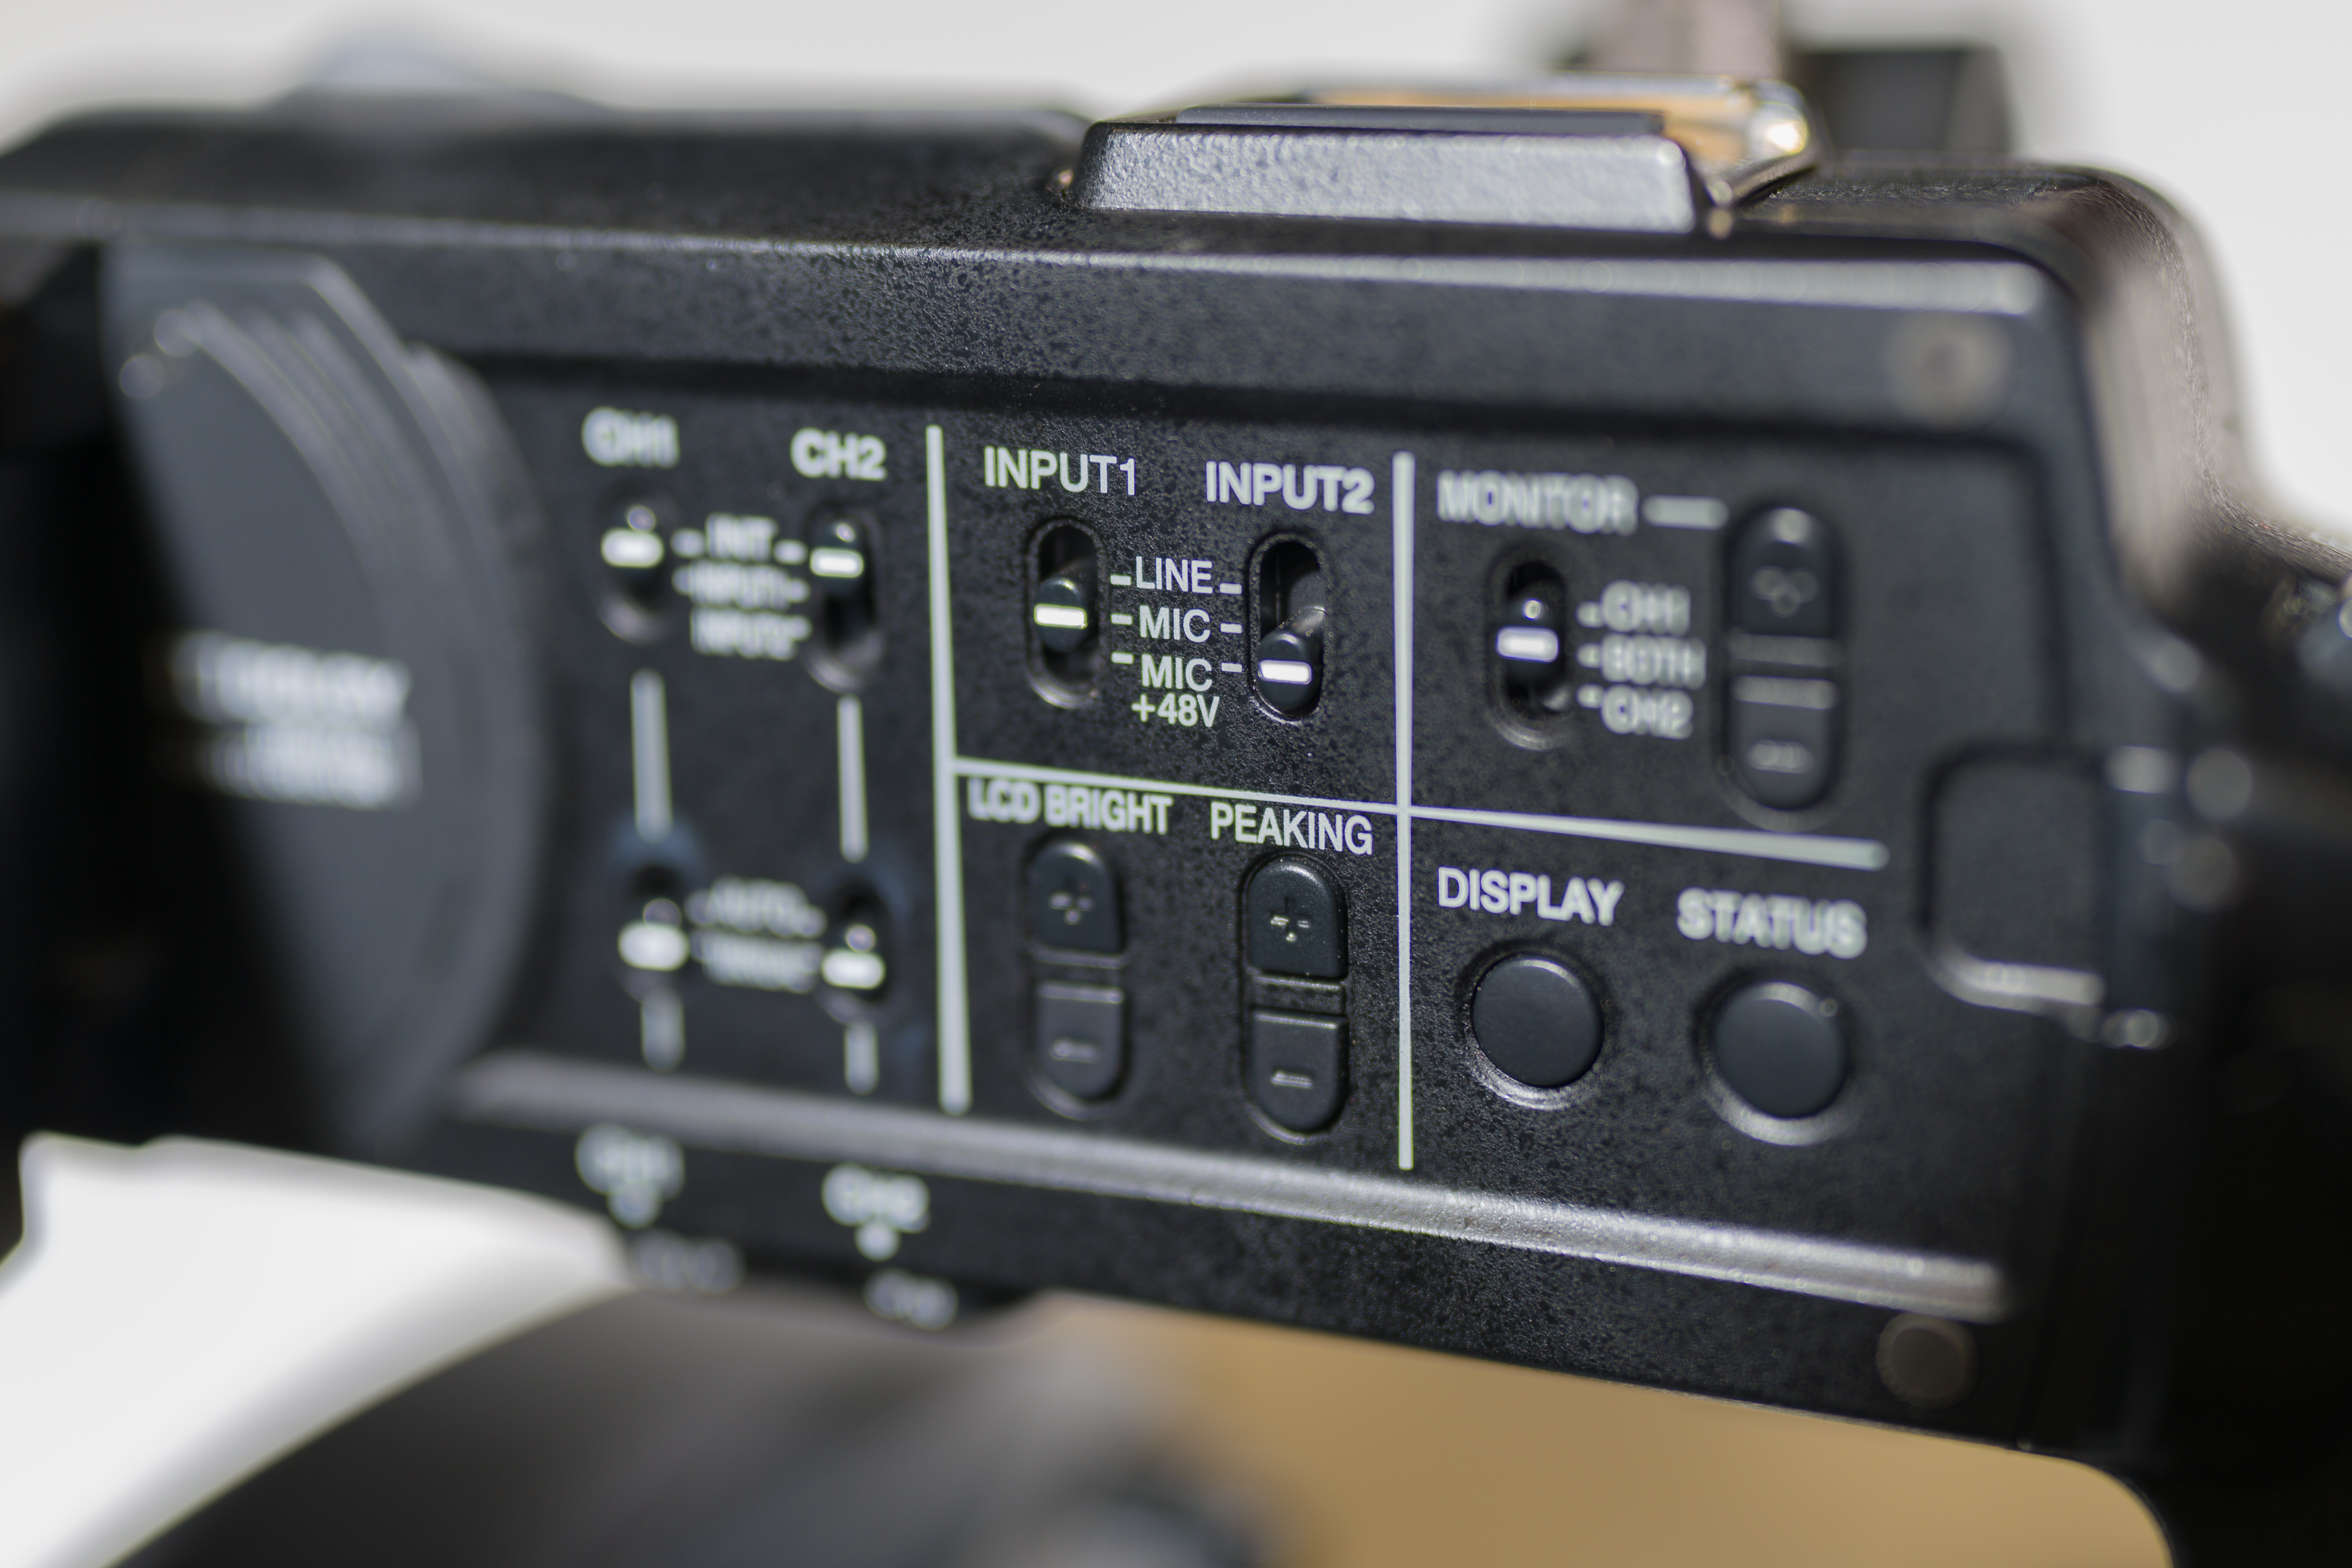 Side of video camera showing input controls for two inputs that can be set to Line, Mic, and Mic +48v. 